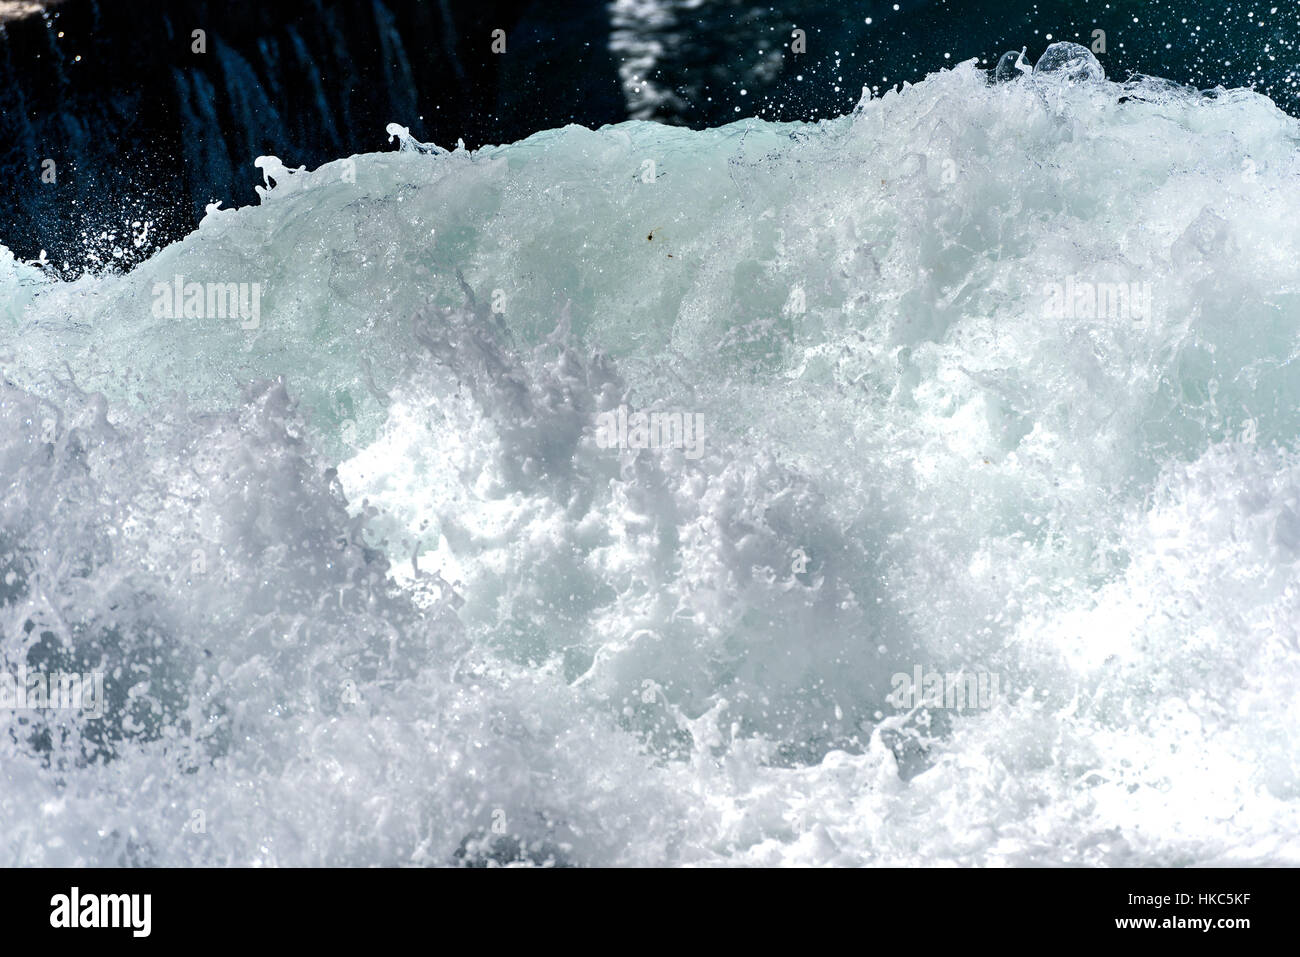 Sea foam of the waves crushing into the shore texture. Wild powerful waves are splashing and forming foam. Stock Photo